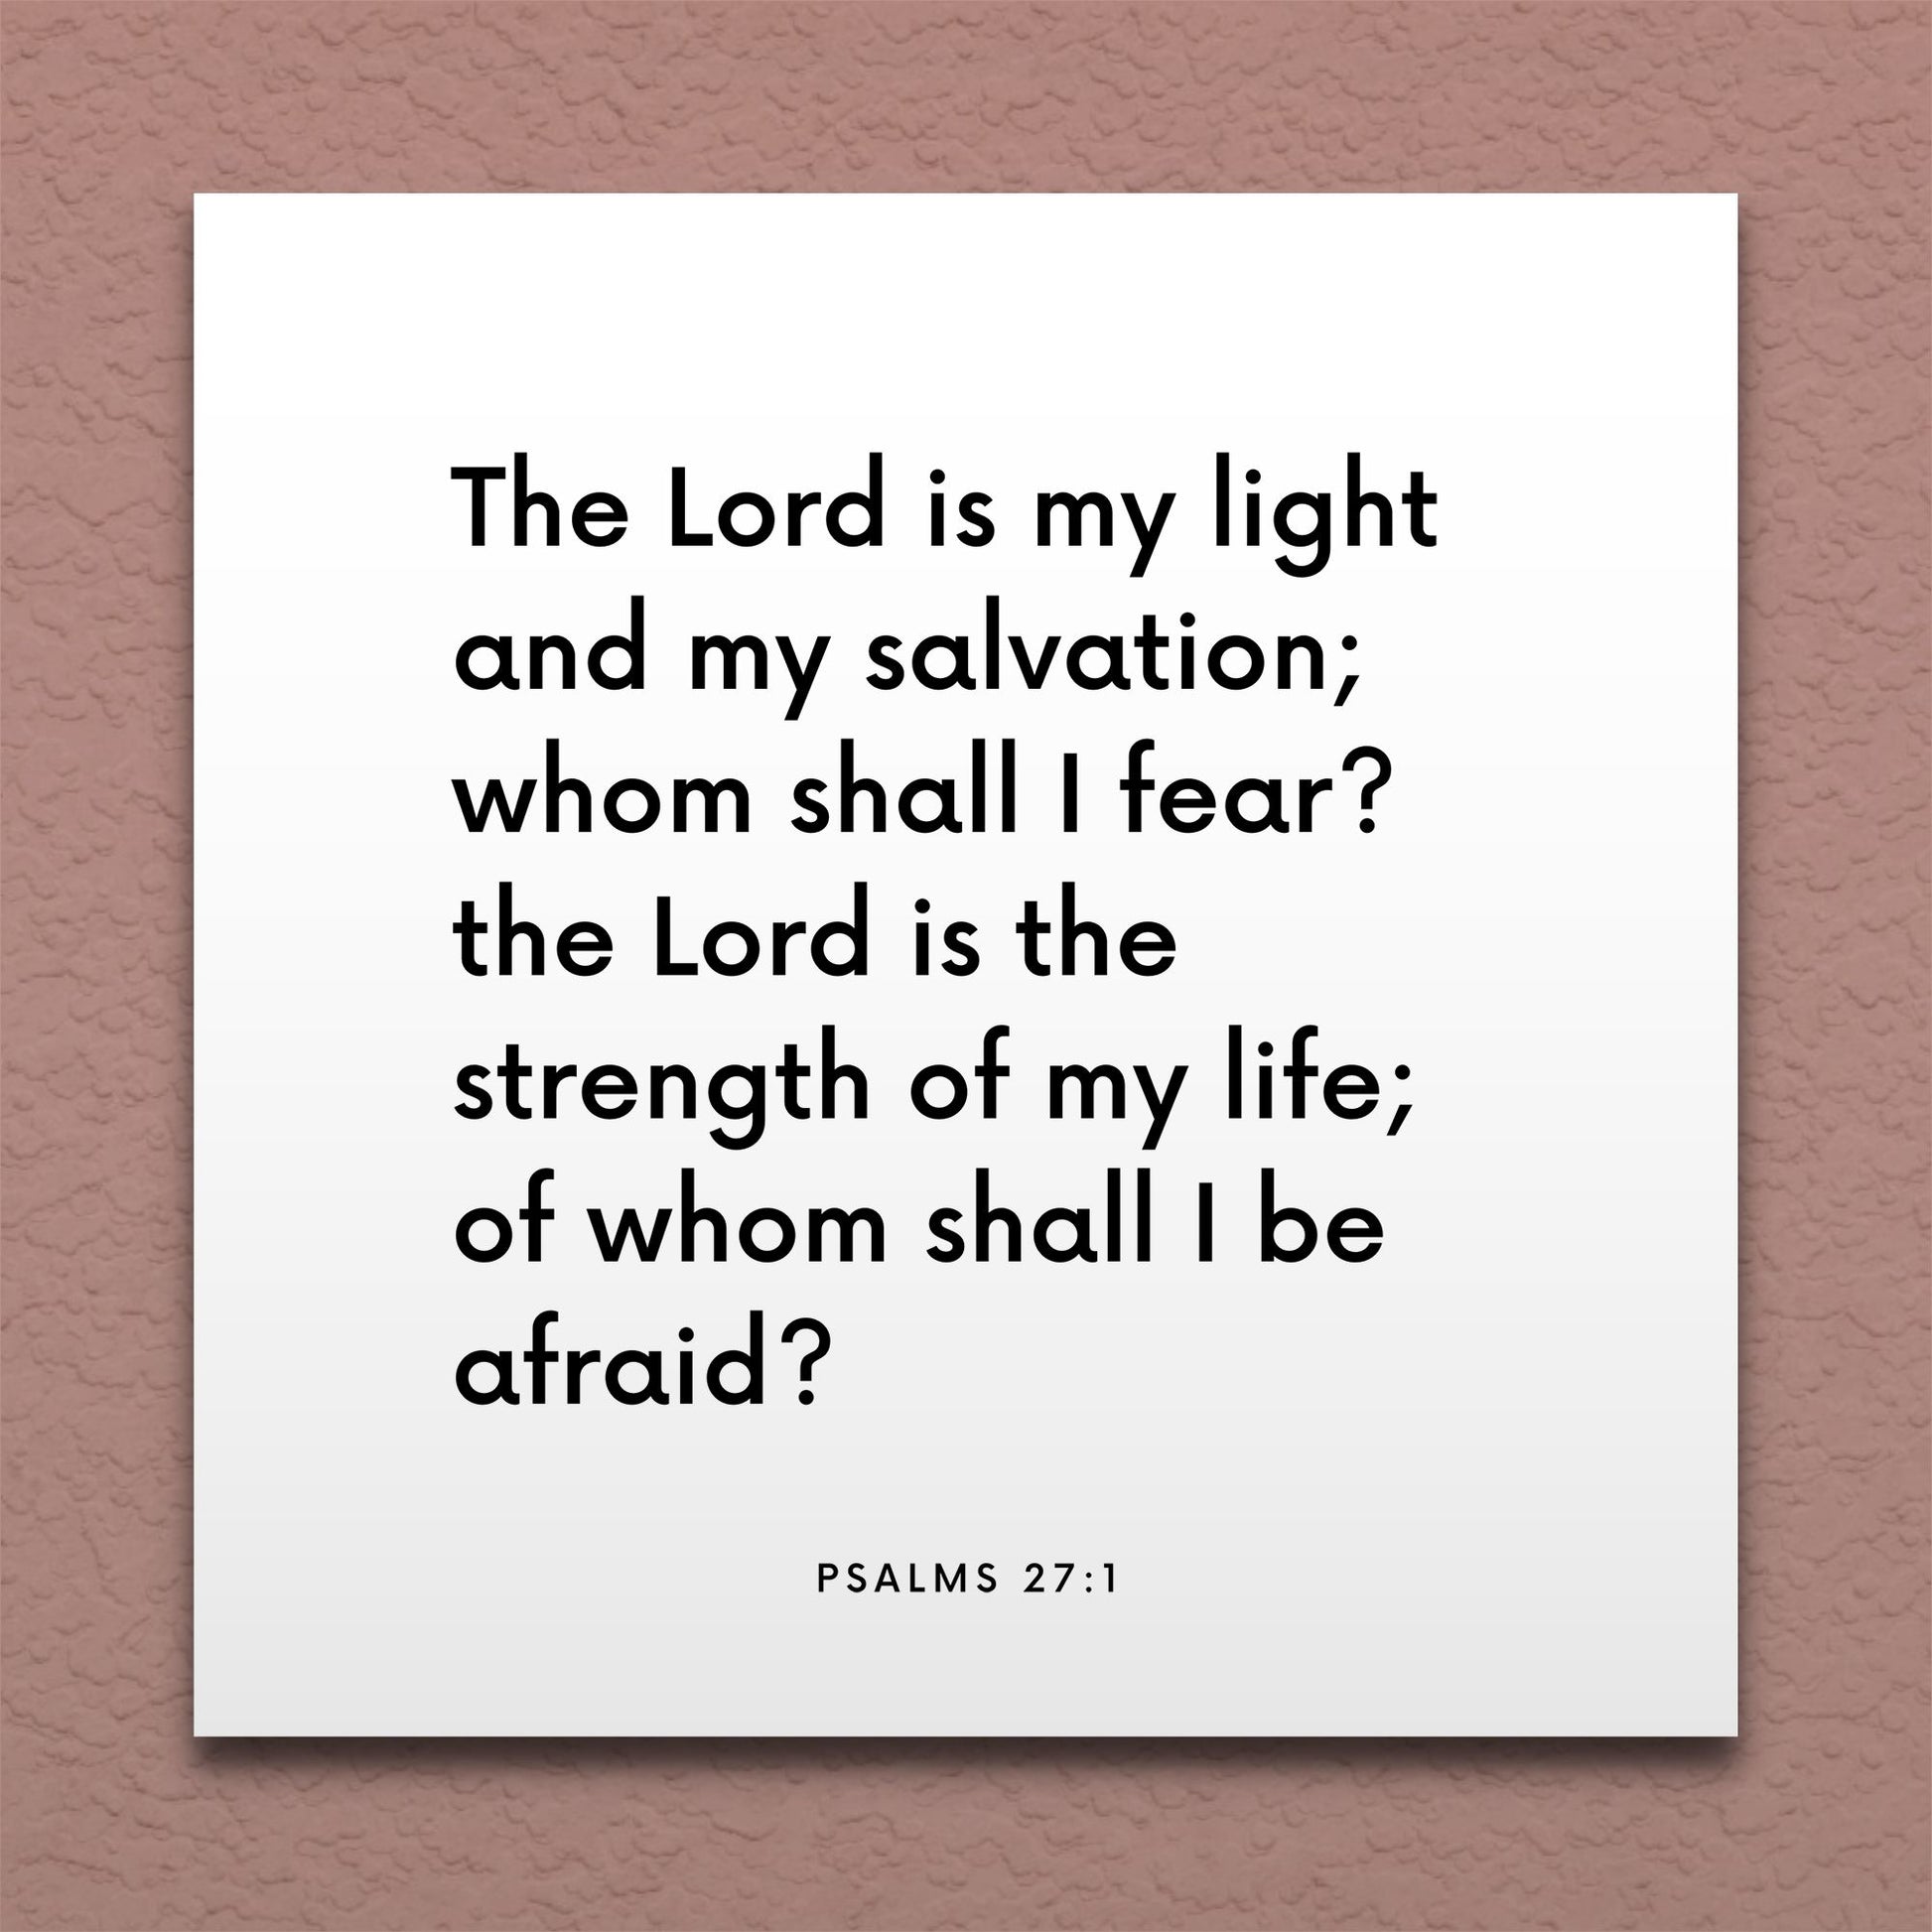 Wall-mounted scripture tile for Psalms 27:1 - "The Lord is my light and my salvation; whom shall I fear?"